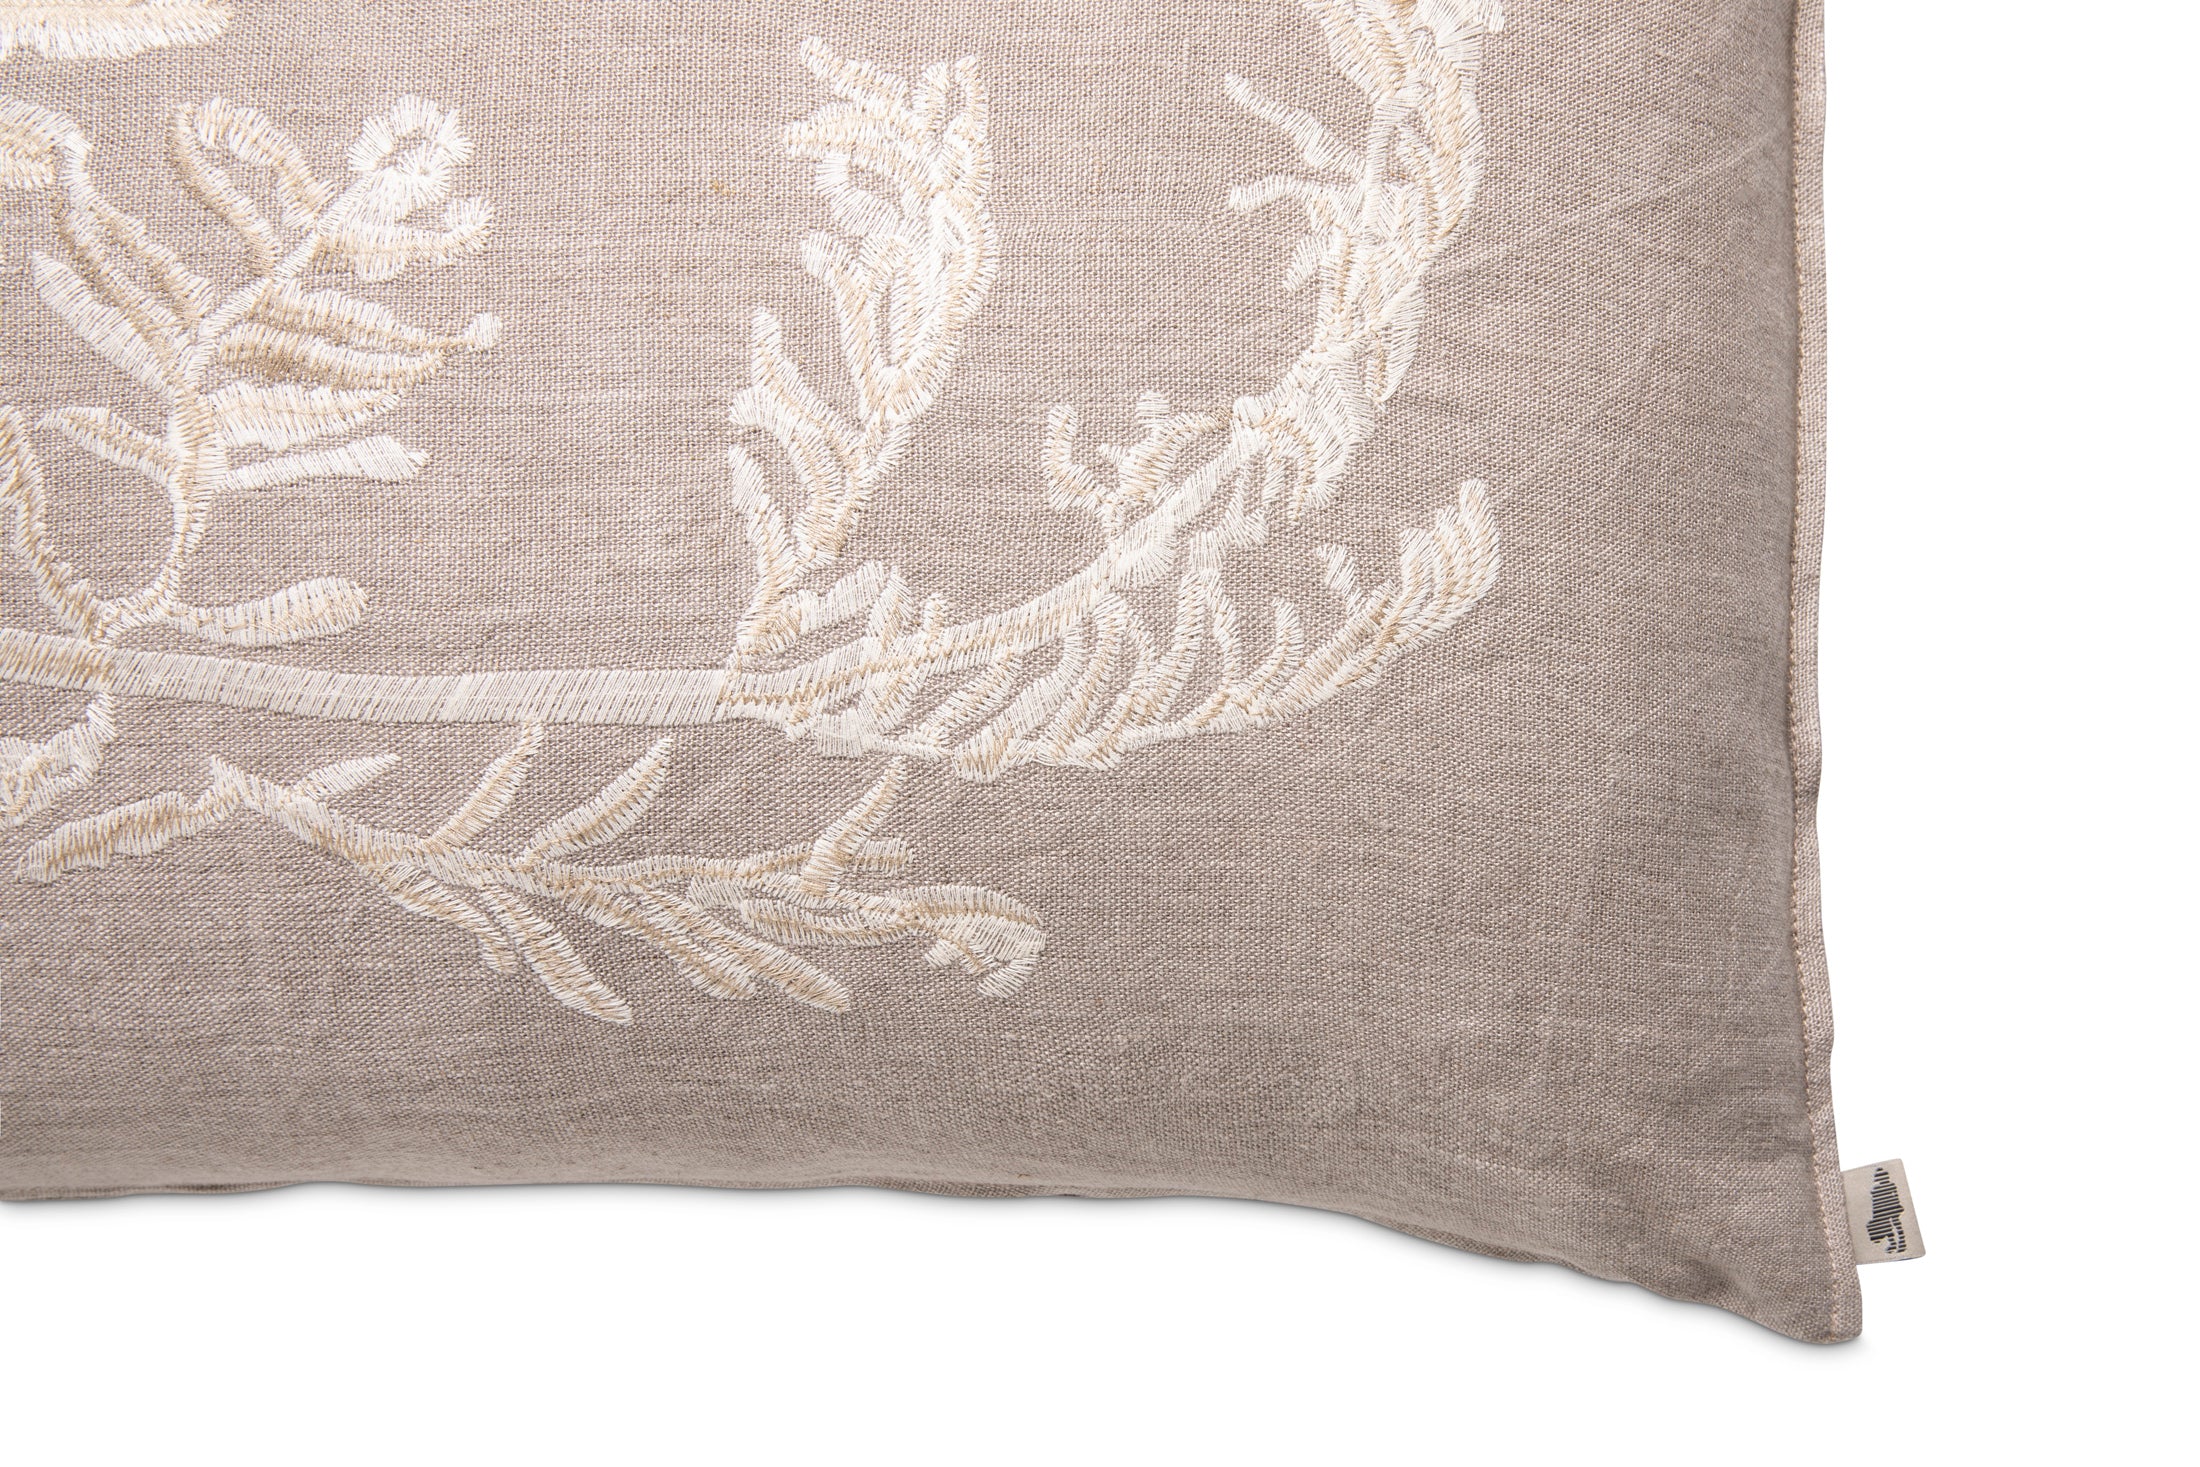 Fern 1 Embroidered Pillow